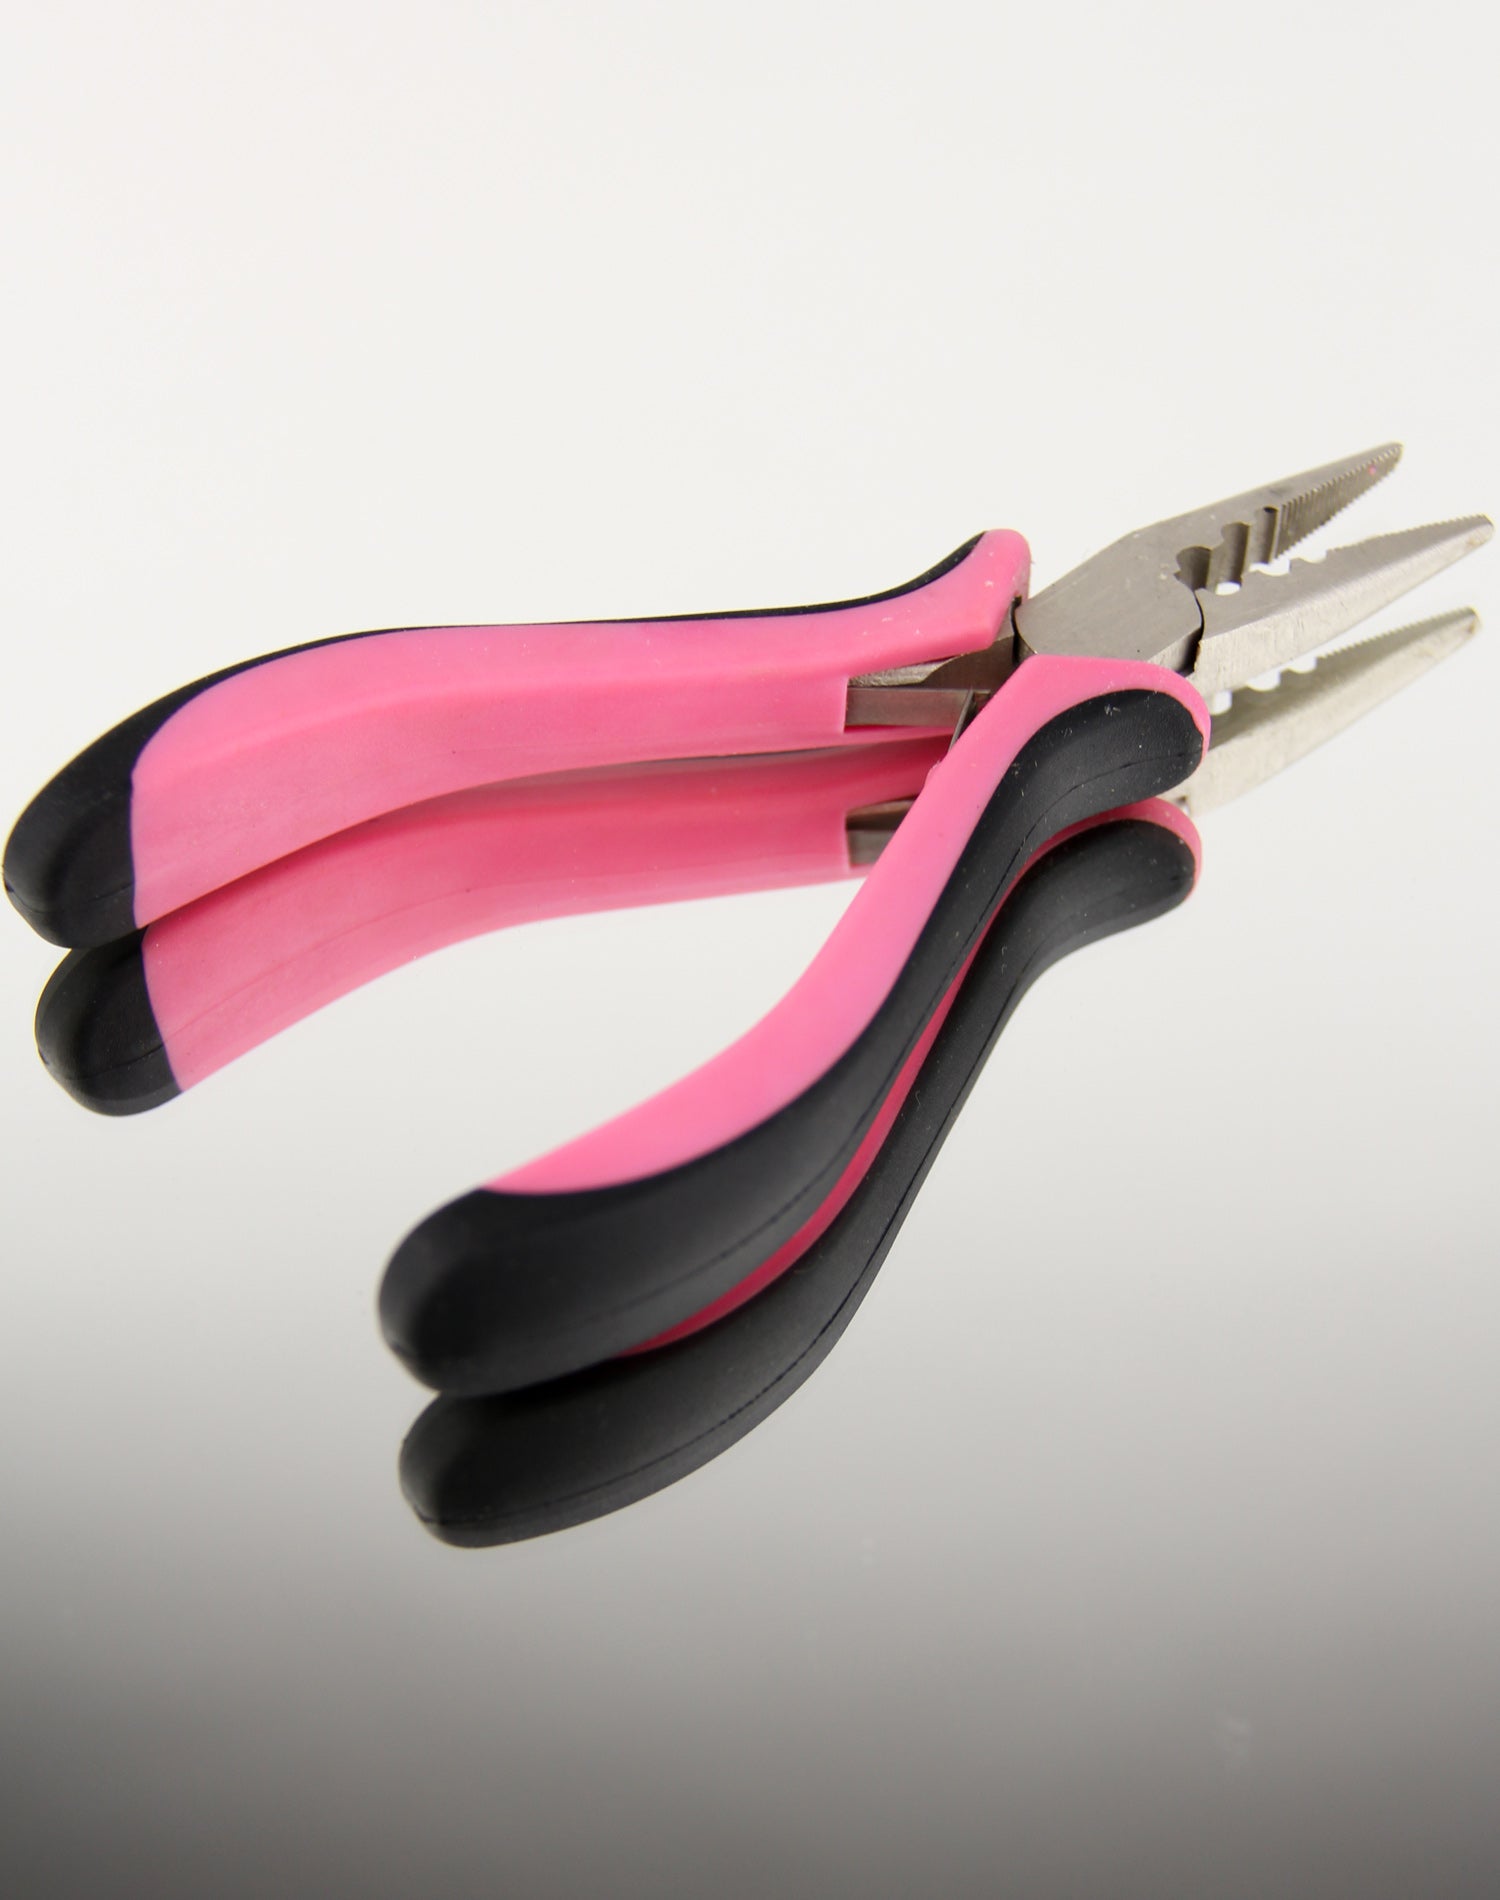 Pink tool for both Keratin and weft